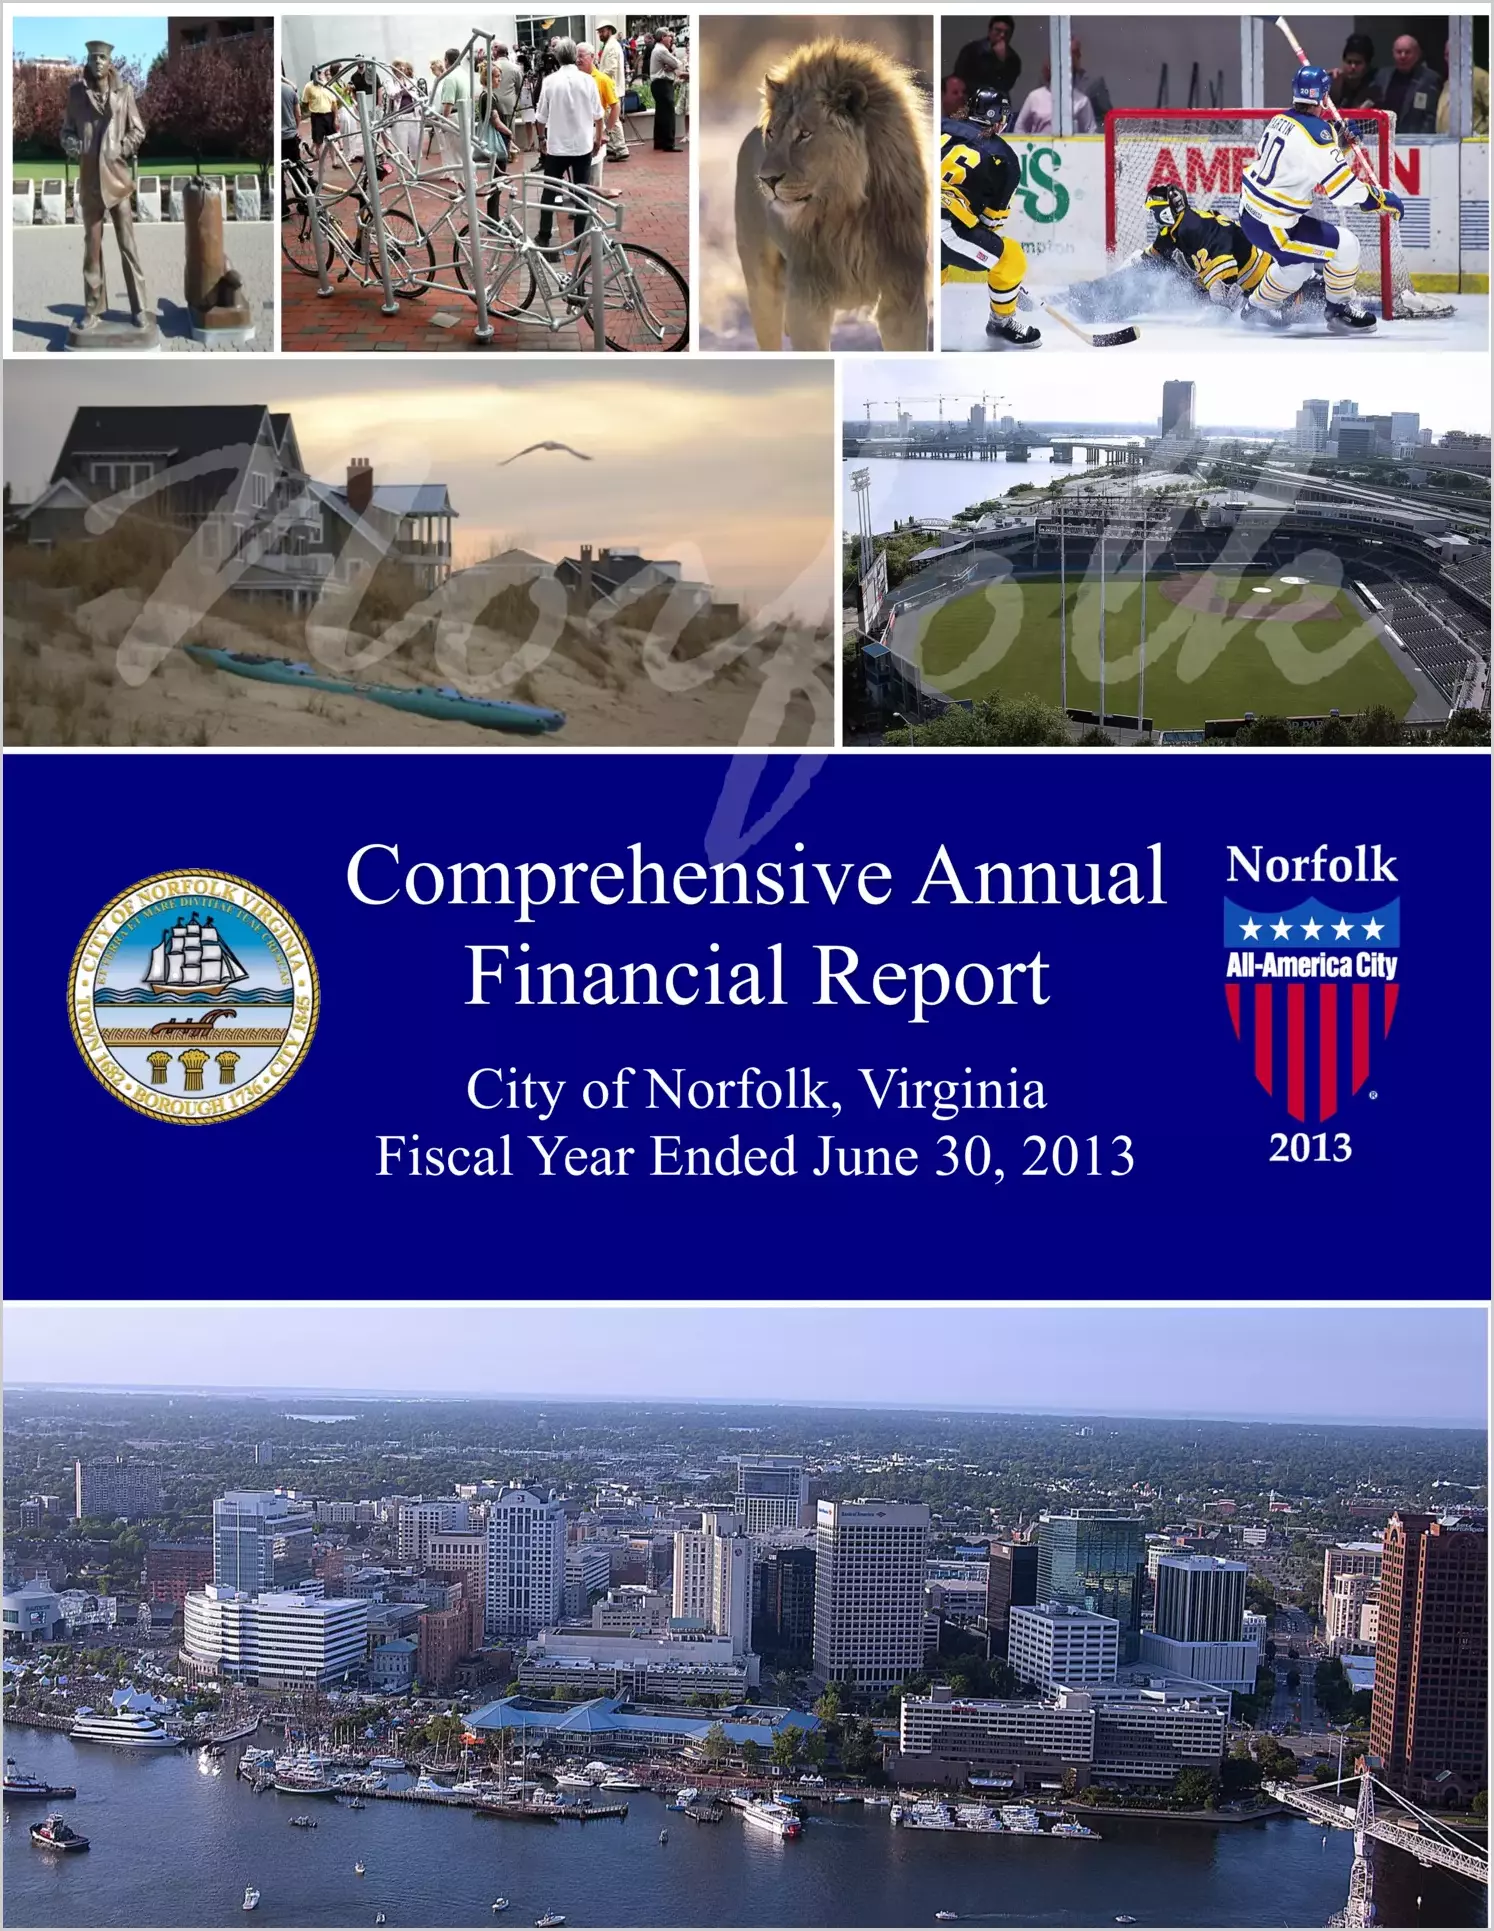 2013 Annual Financial Report for City of Norfolk